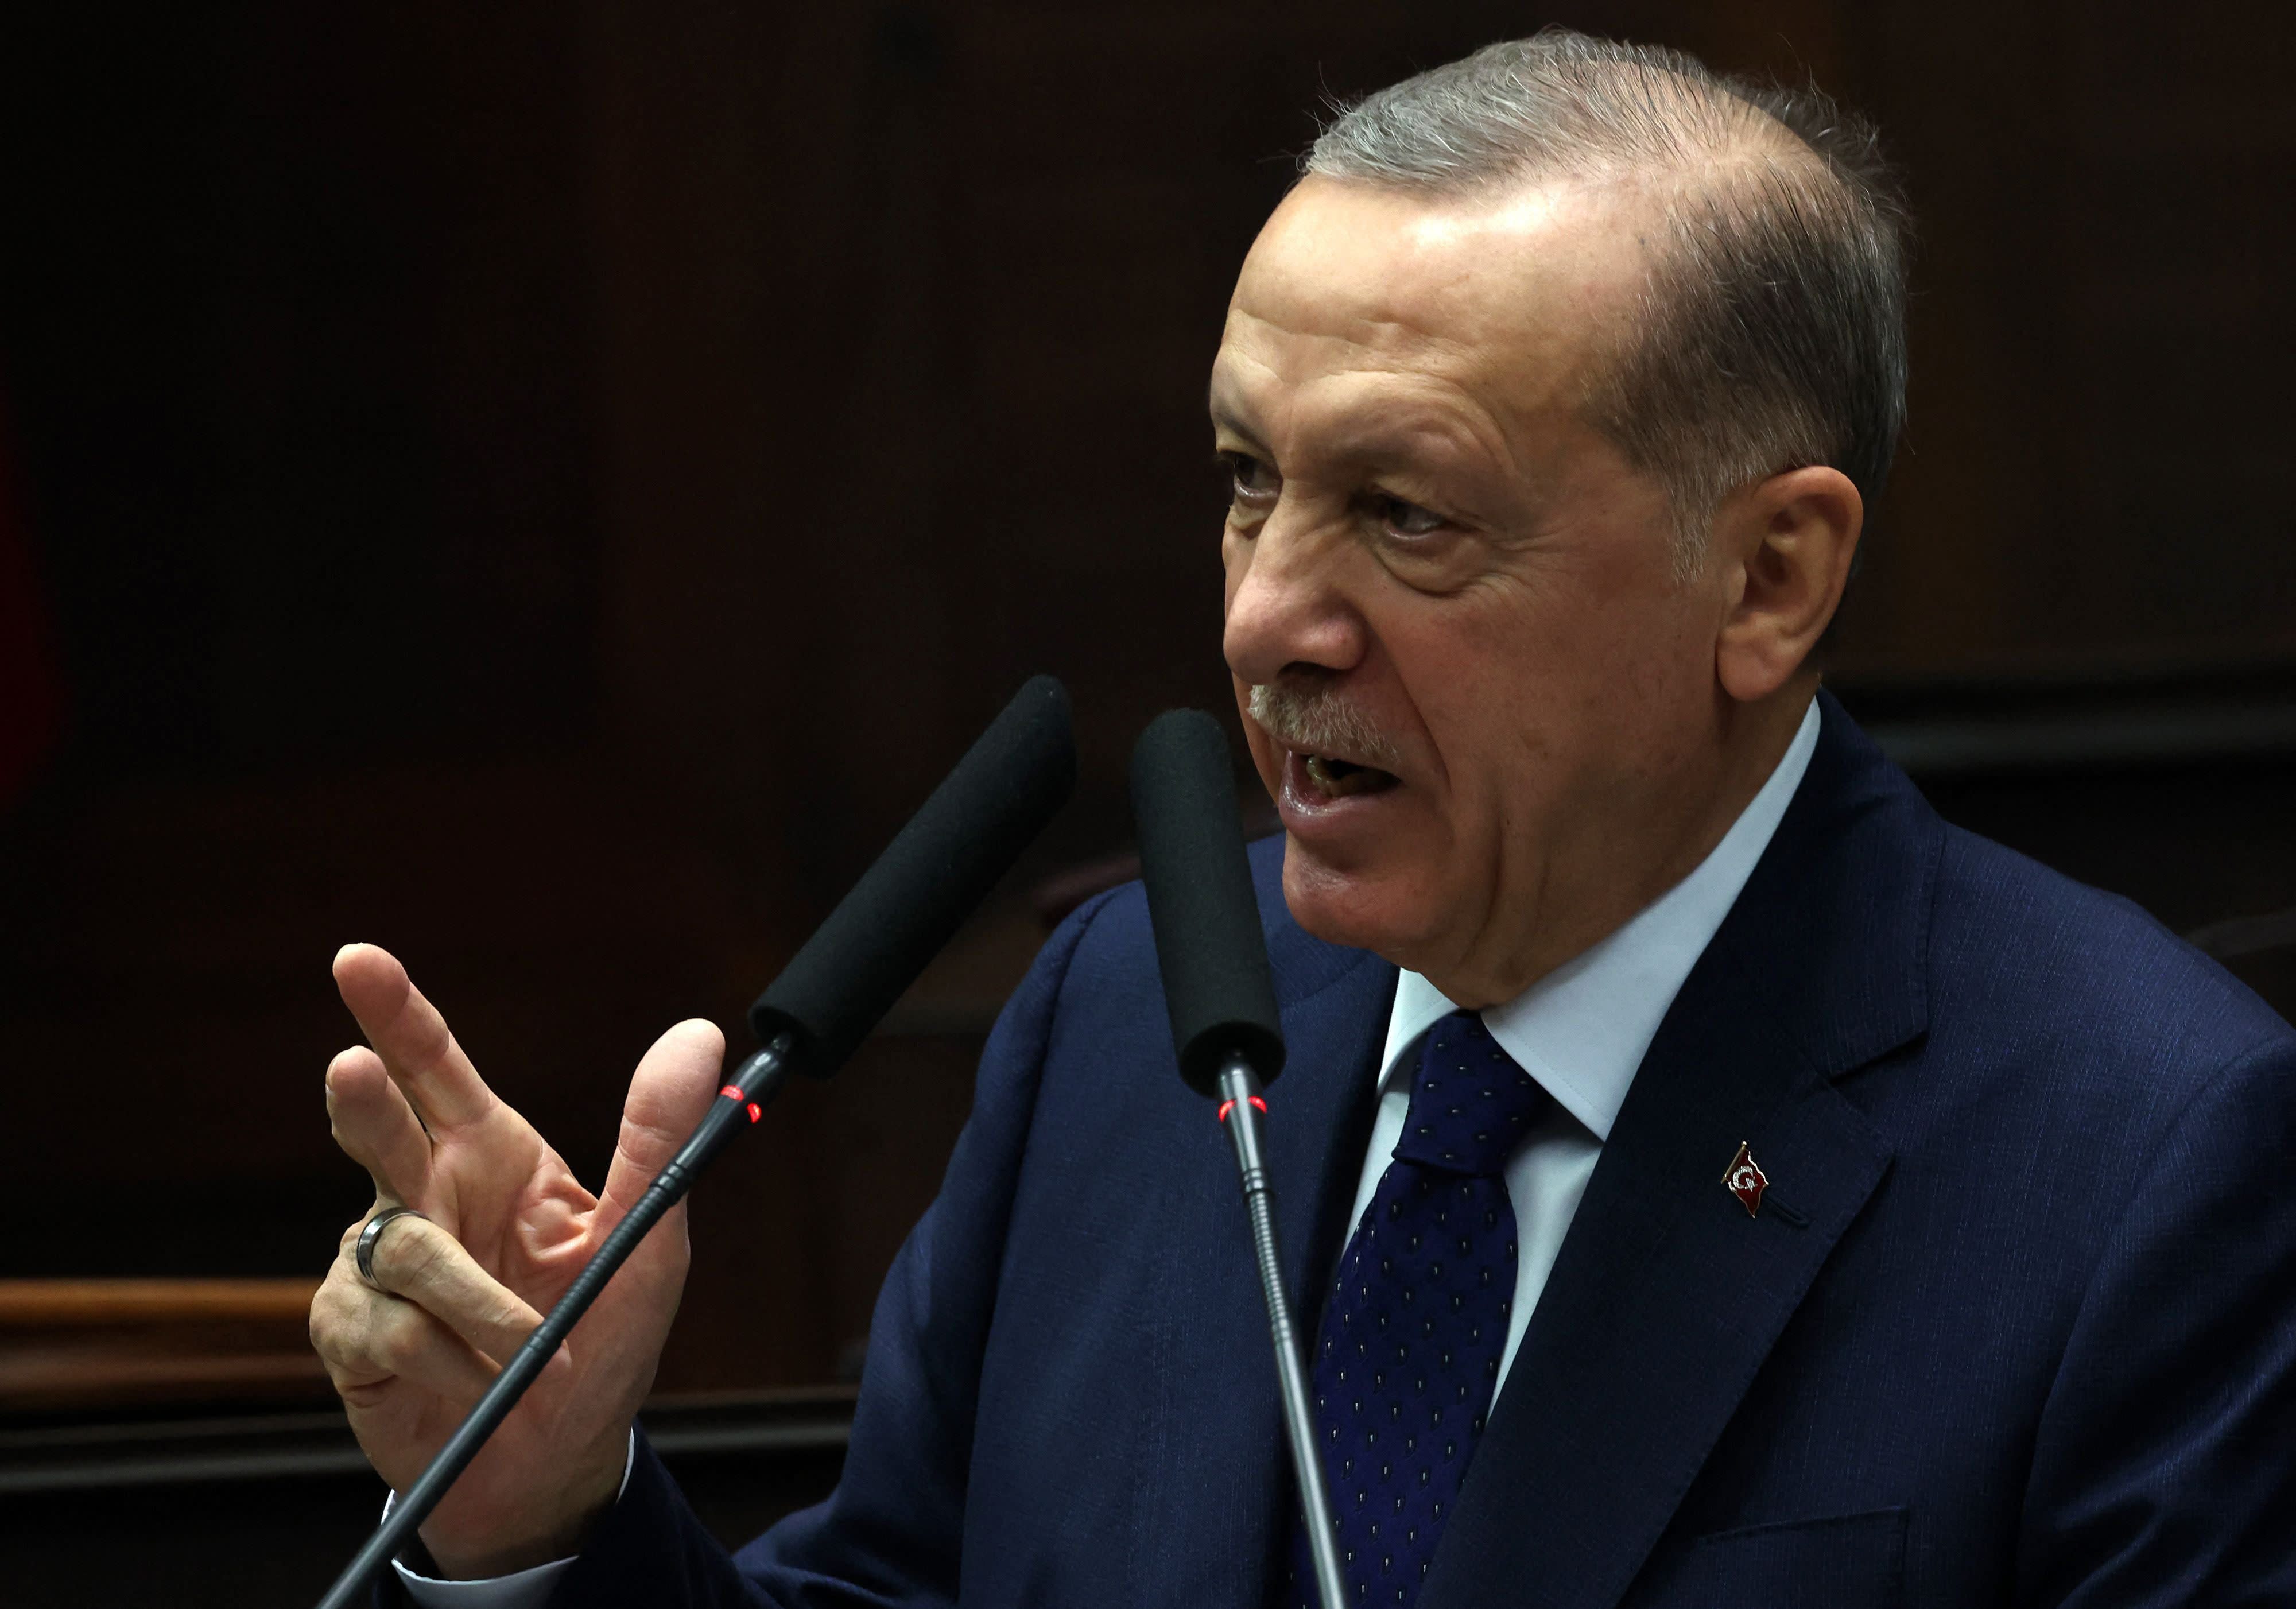 Monday’s papers: Erdoğan hints at NATO acceptance for Finland, discovery expeditions, slippery roads